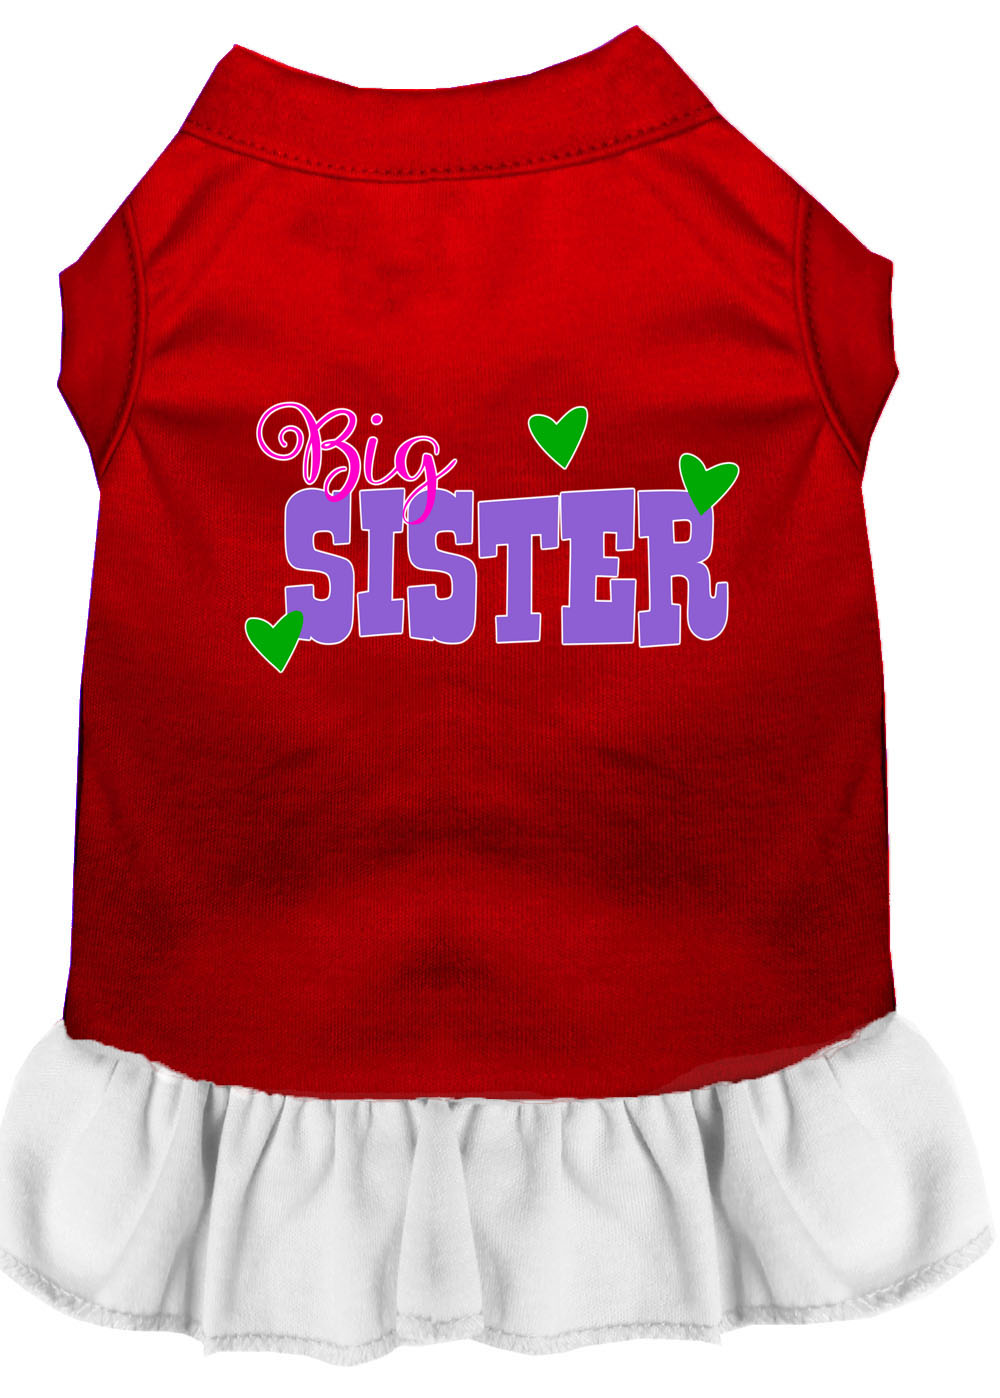 Big Sister Screen Print Dog Dress Red with White XXL